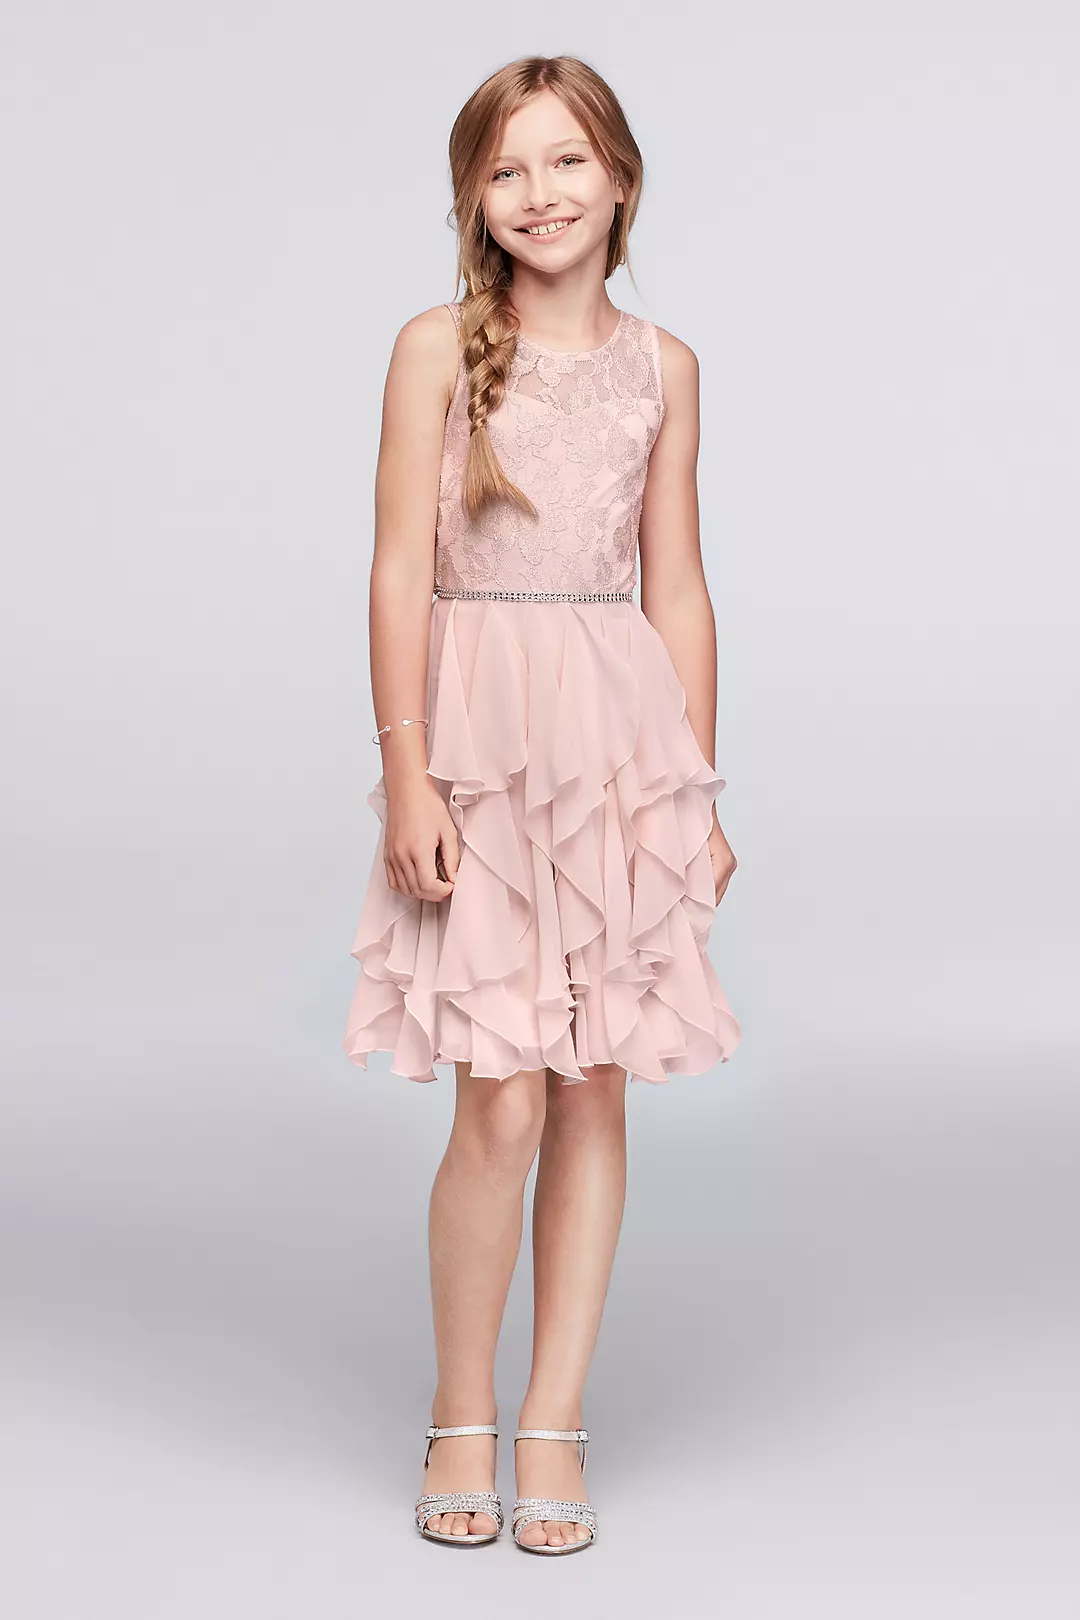 Ruffled Tulle Dress with Lace Bodice Image